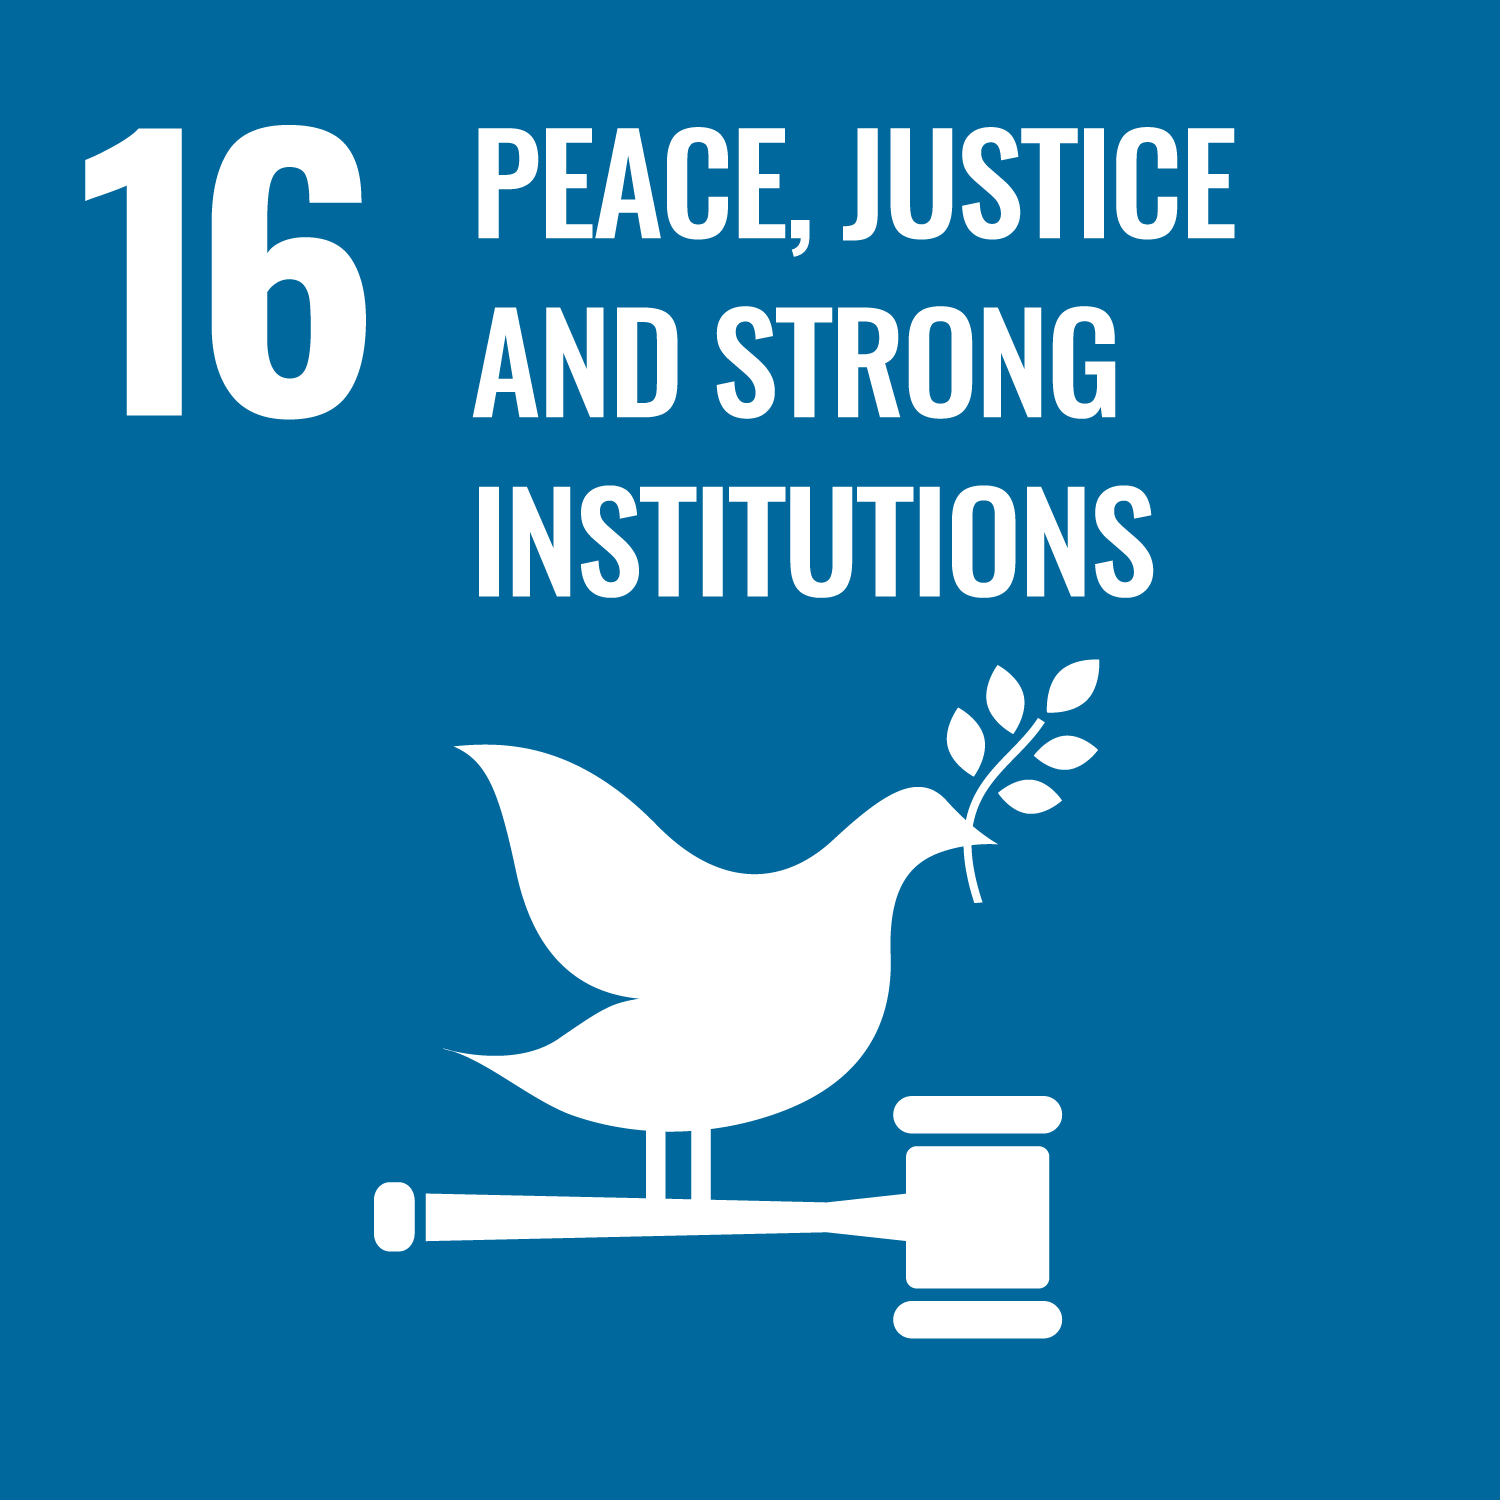 Justice, peace and strong institutions